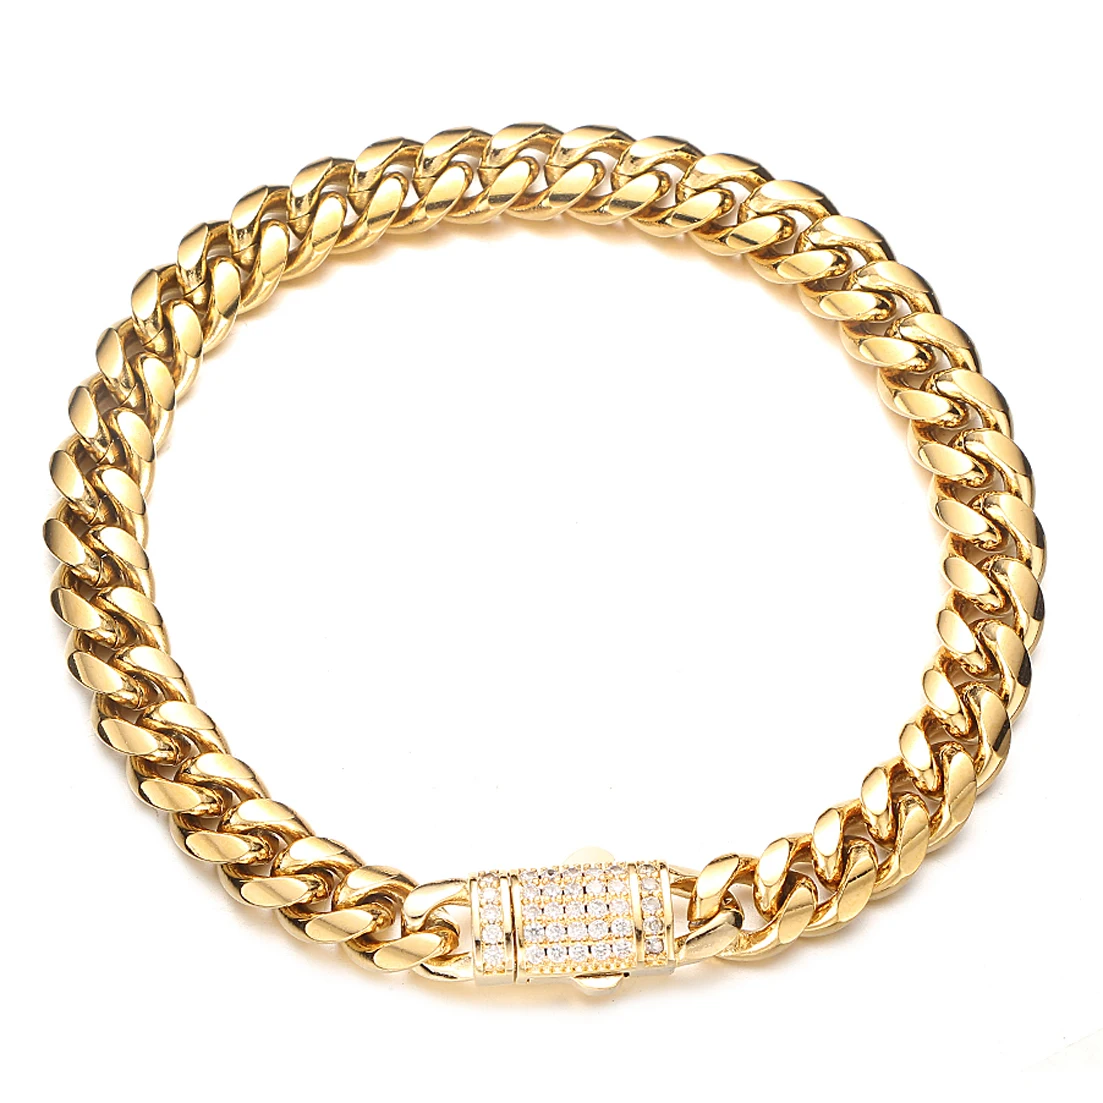 6/8/10/12/14mm New Men Chain Bracelet Stainless Steel Curb Cuban Link Chain Bangle for Male Women Hiphop Wrist Jewelry Gift